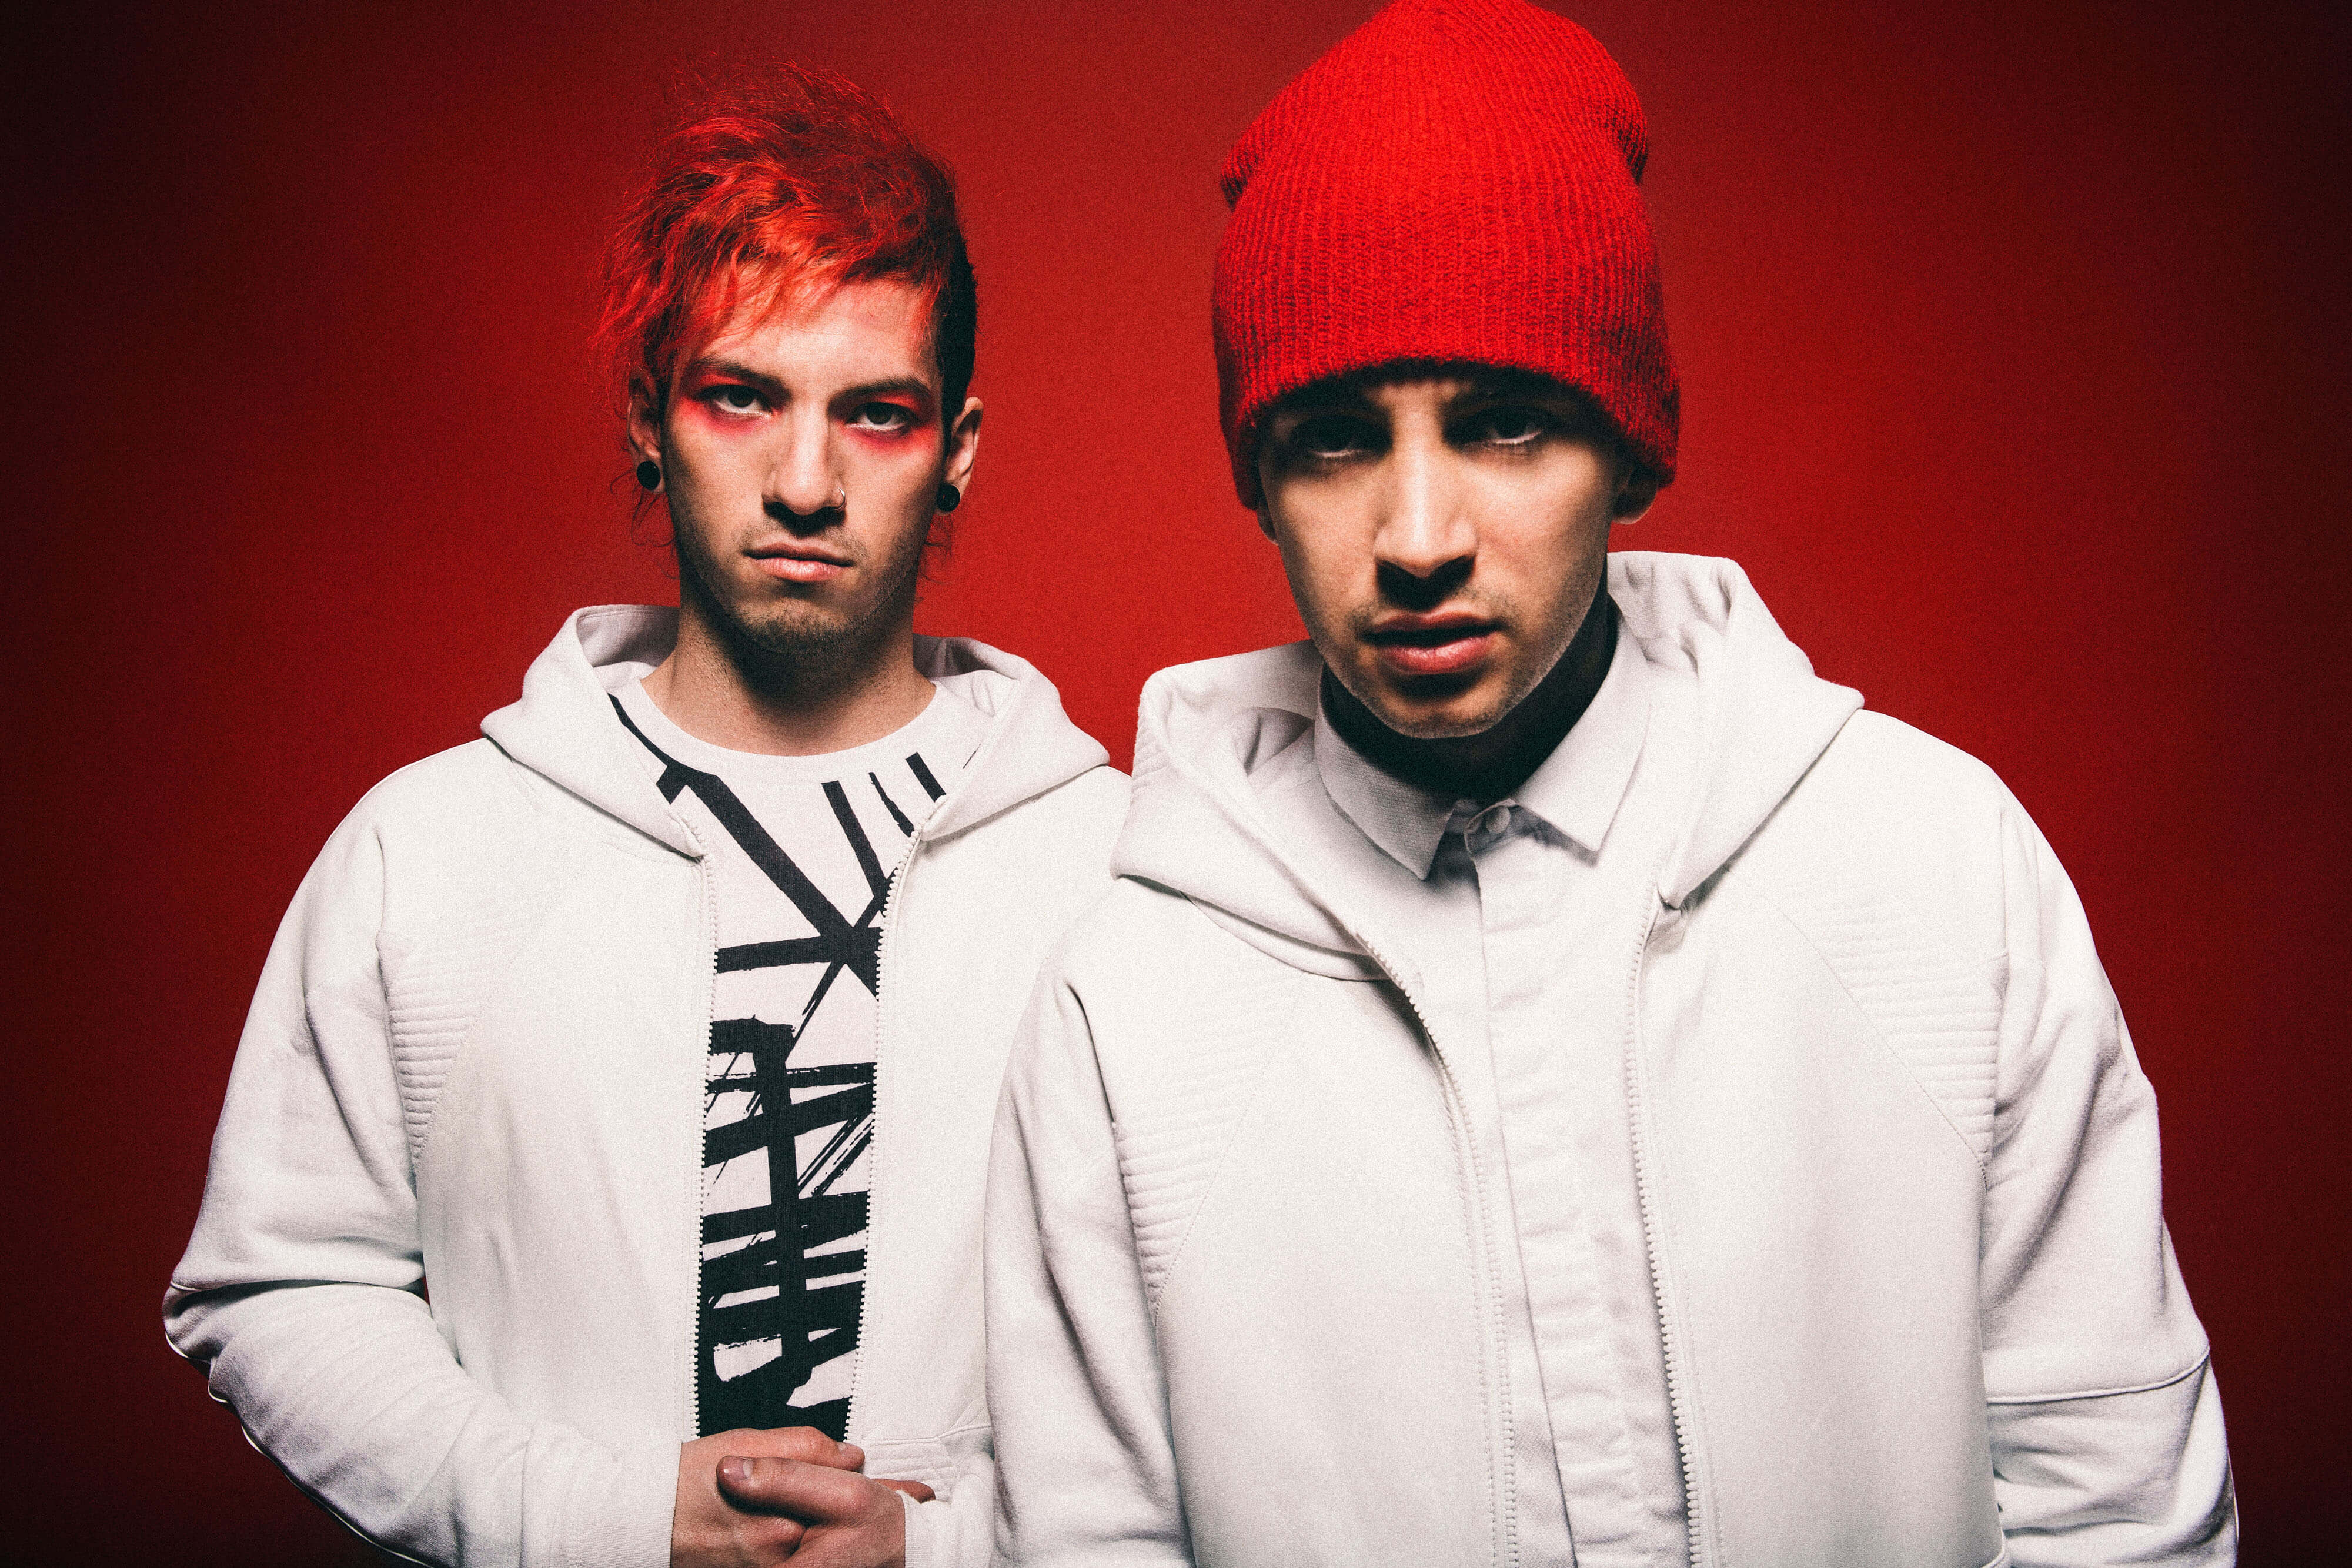 Twenty One Pilots Scores First No. 1 With New Album ‘Blurryface,’ Set to Play in Manila on July 18 and July 19